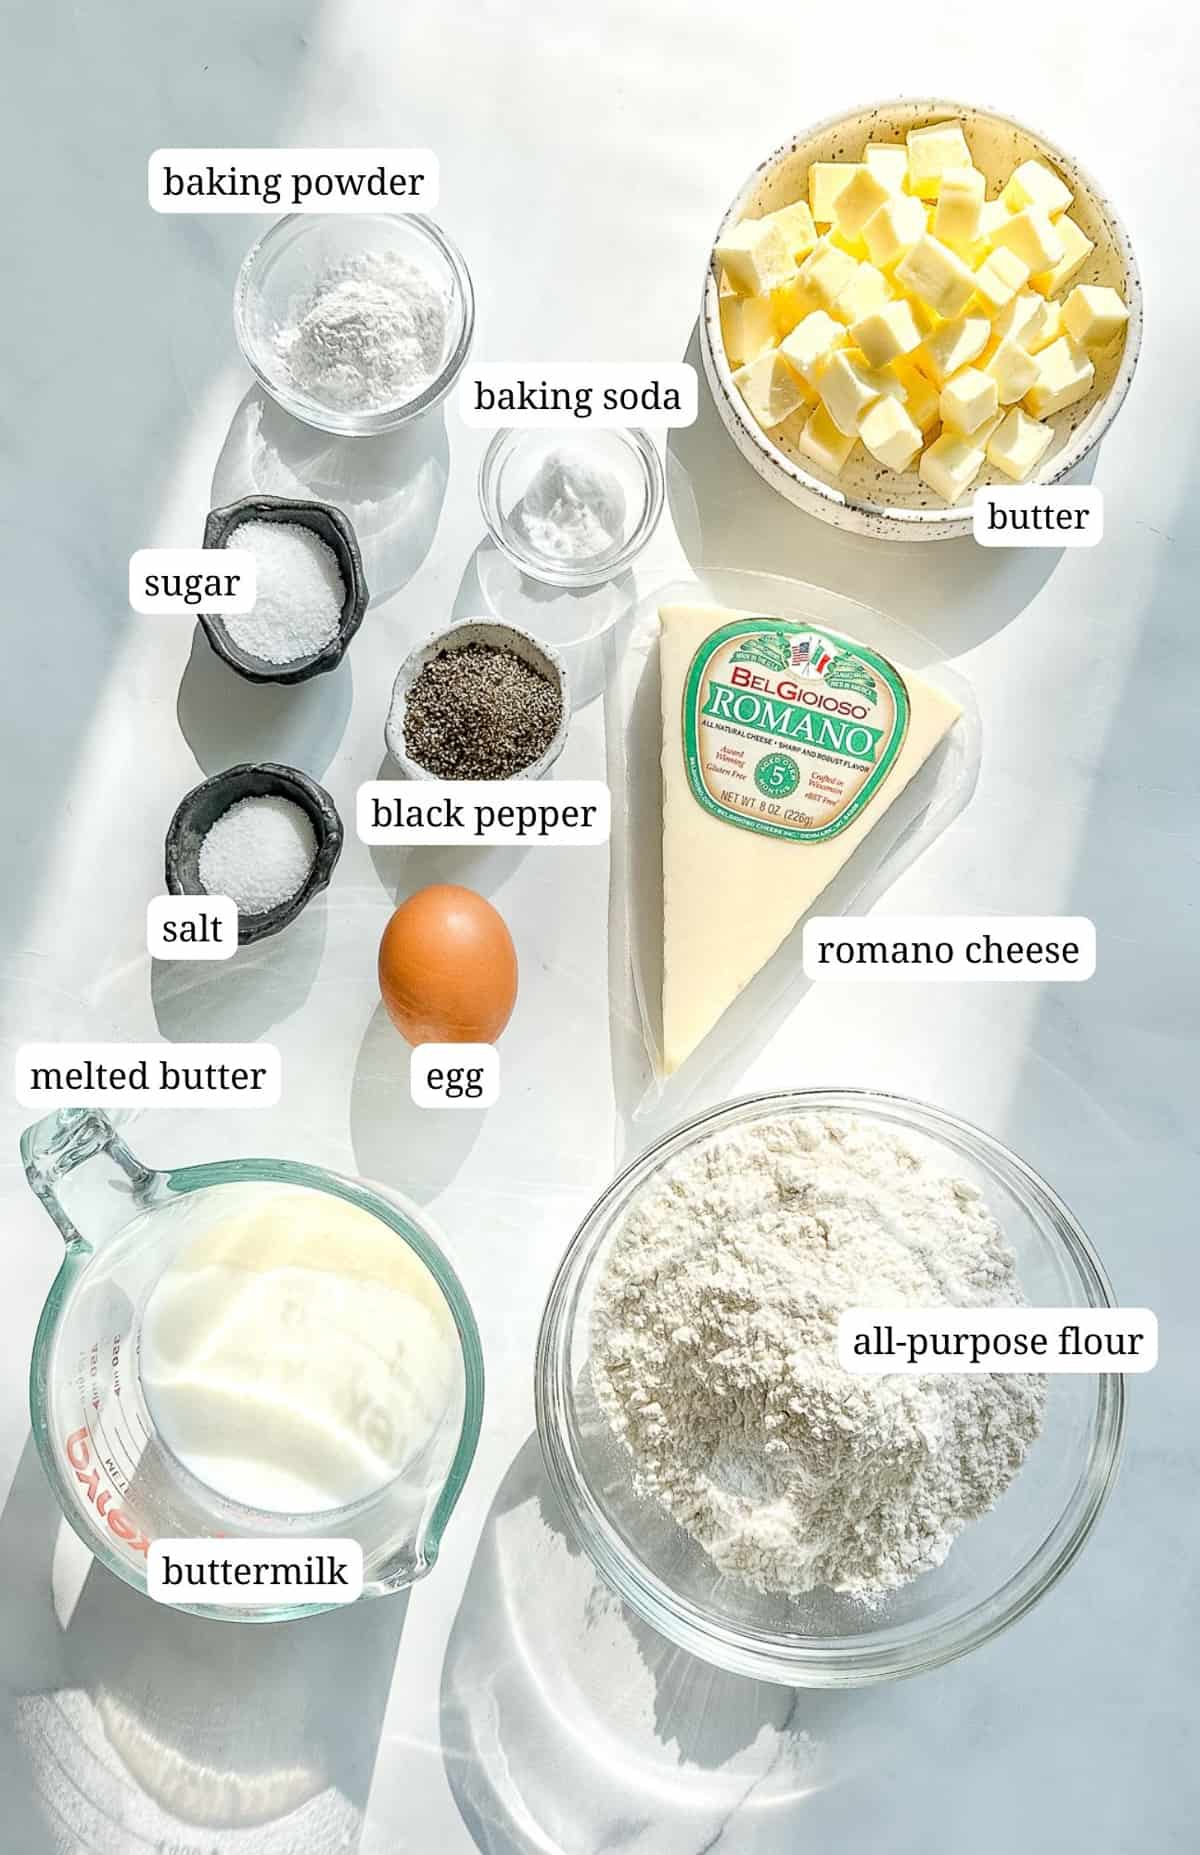 labeled ingredient image for making cacio e pepe biscuits.